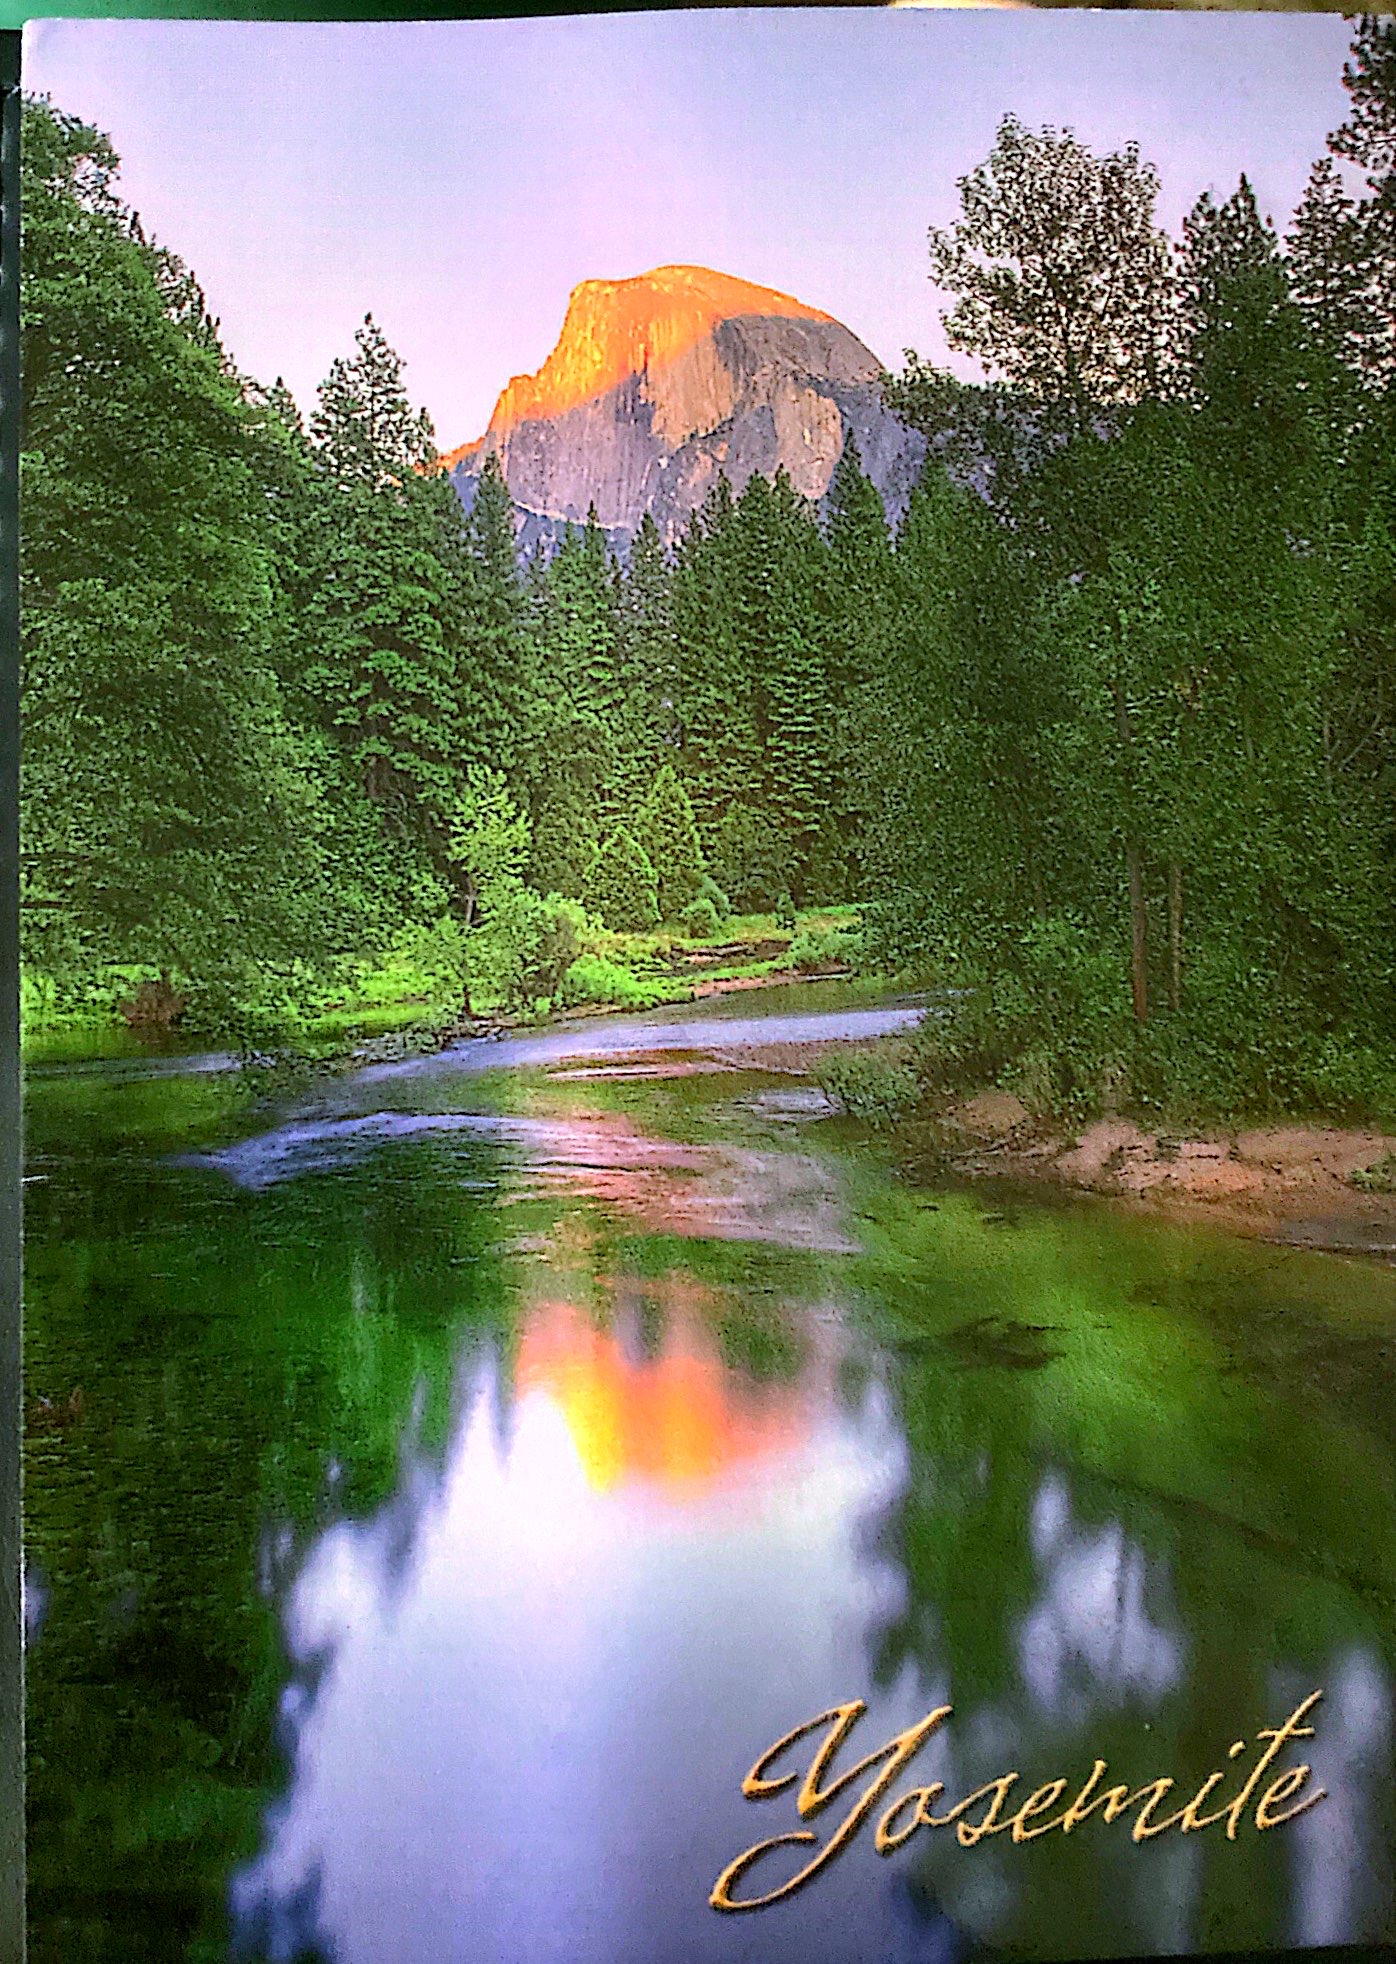 A river and large mountain behind it in Yosemite, but sunset